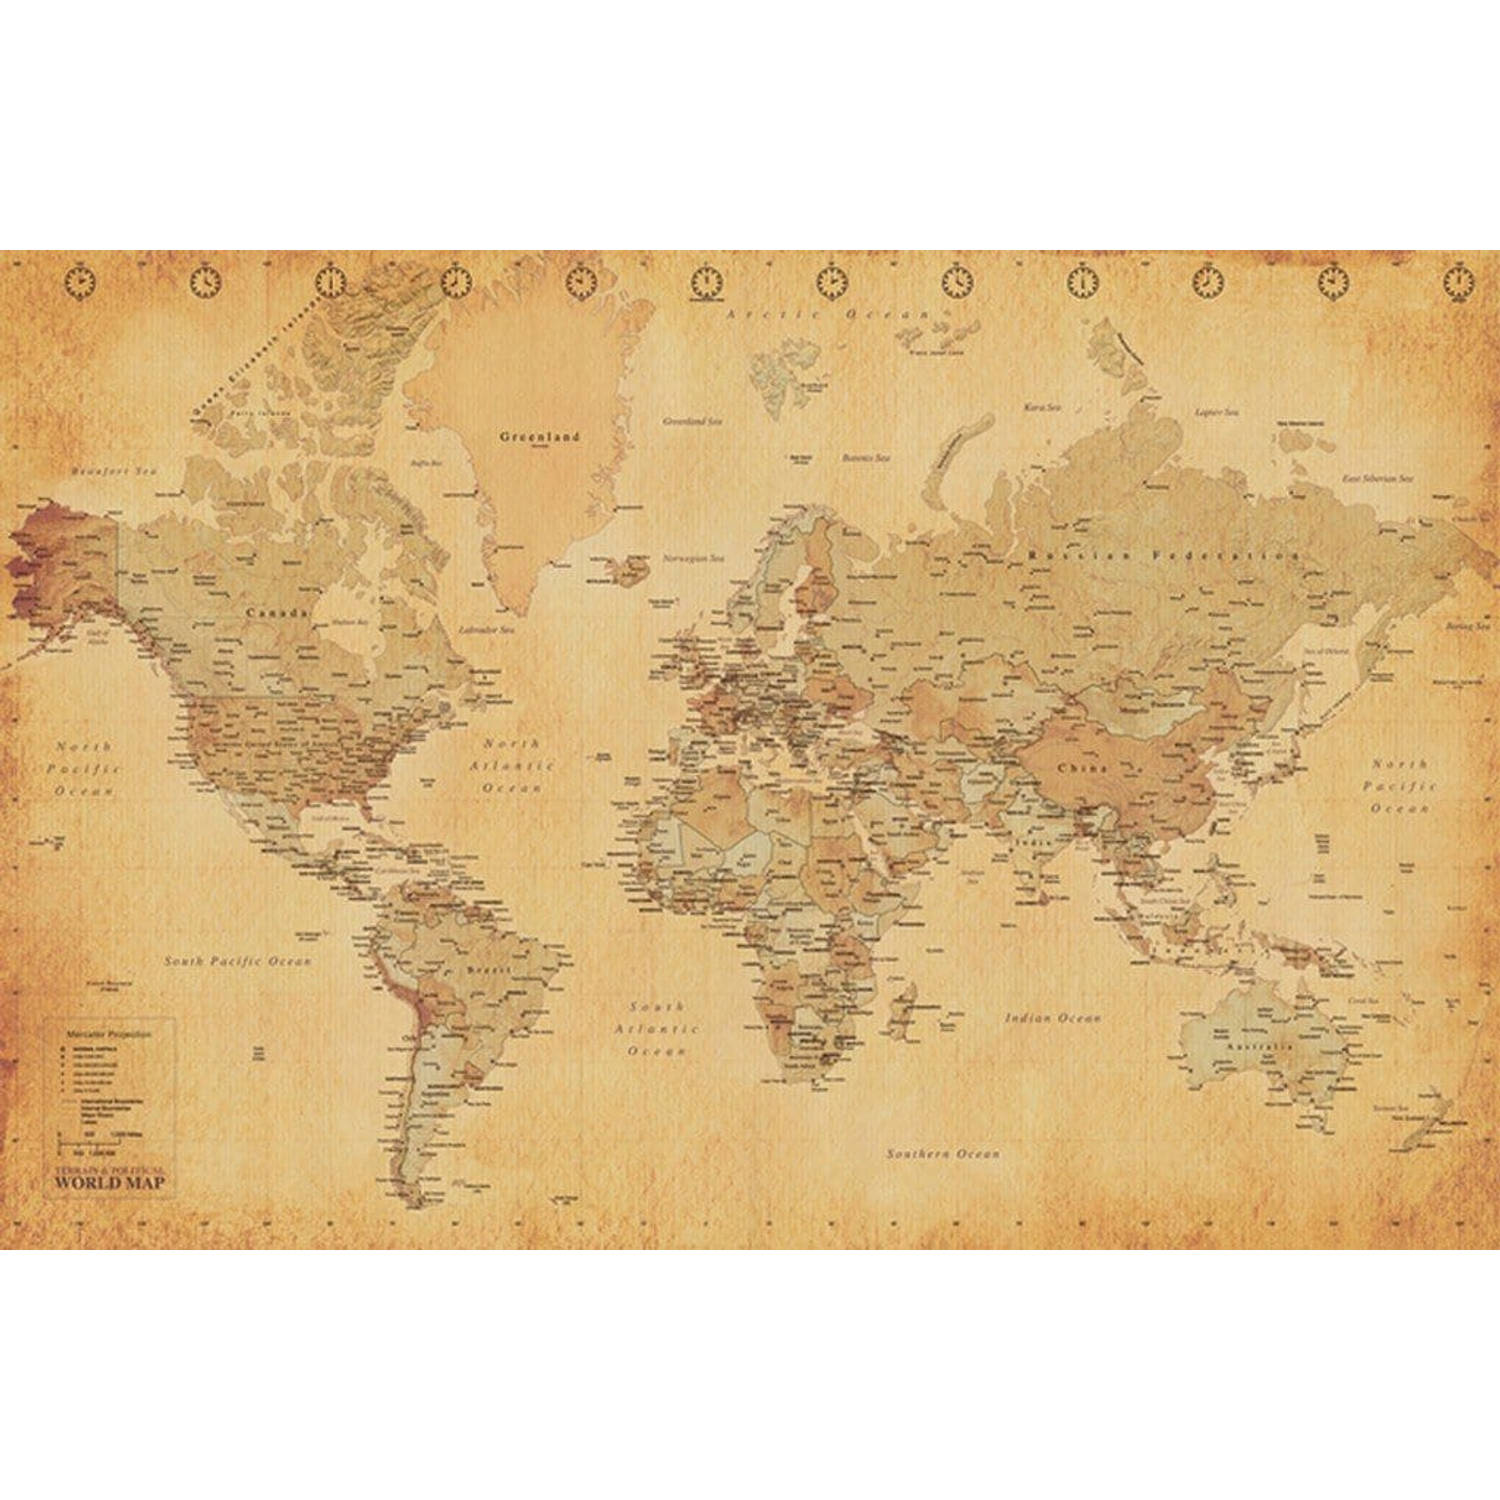 World Map Vintage Style 24 x 36 Inches Maxi Poster